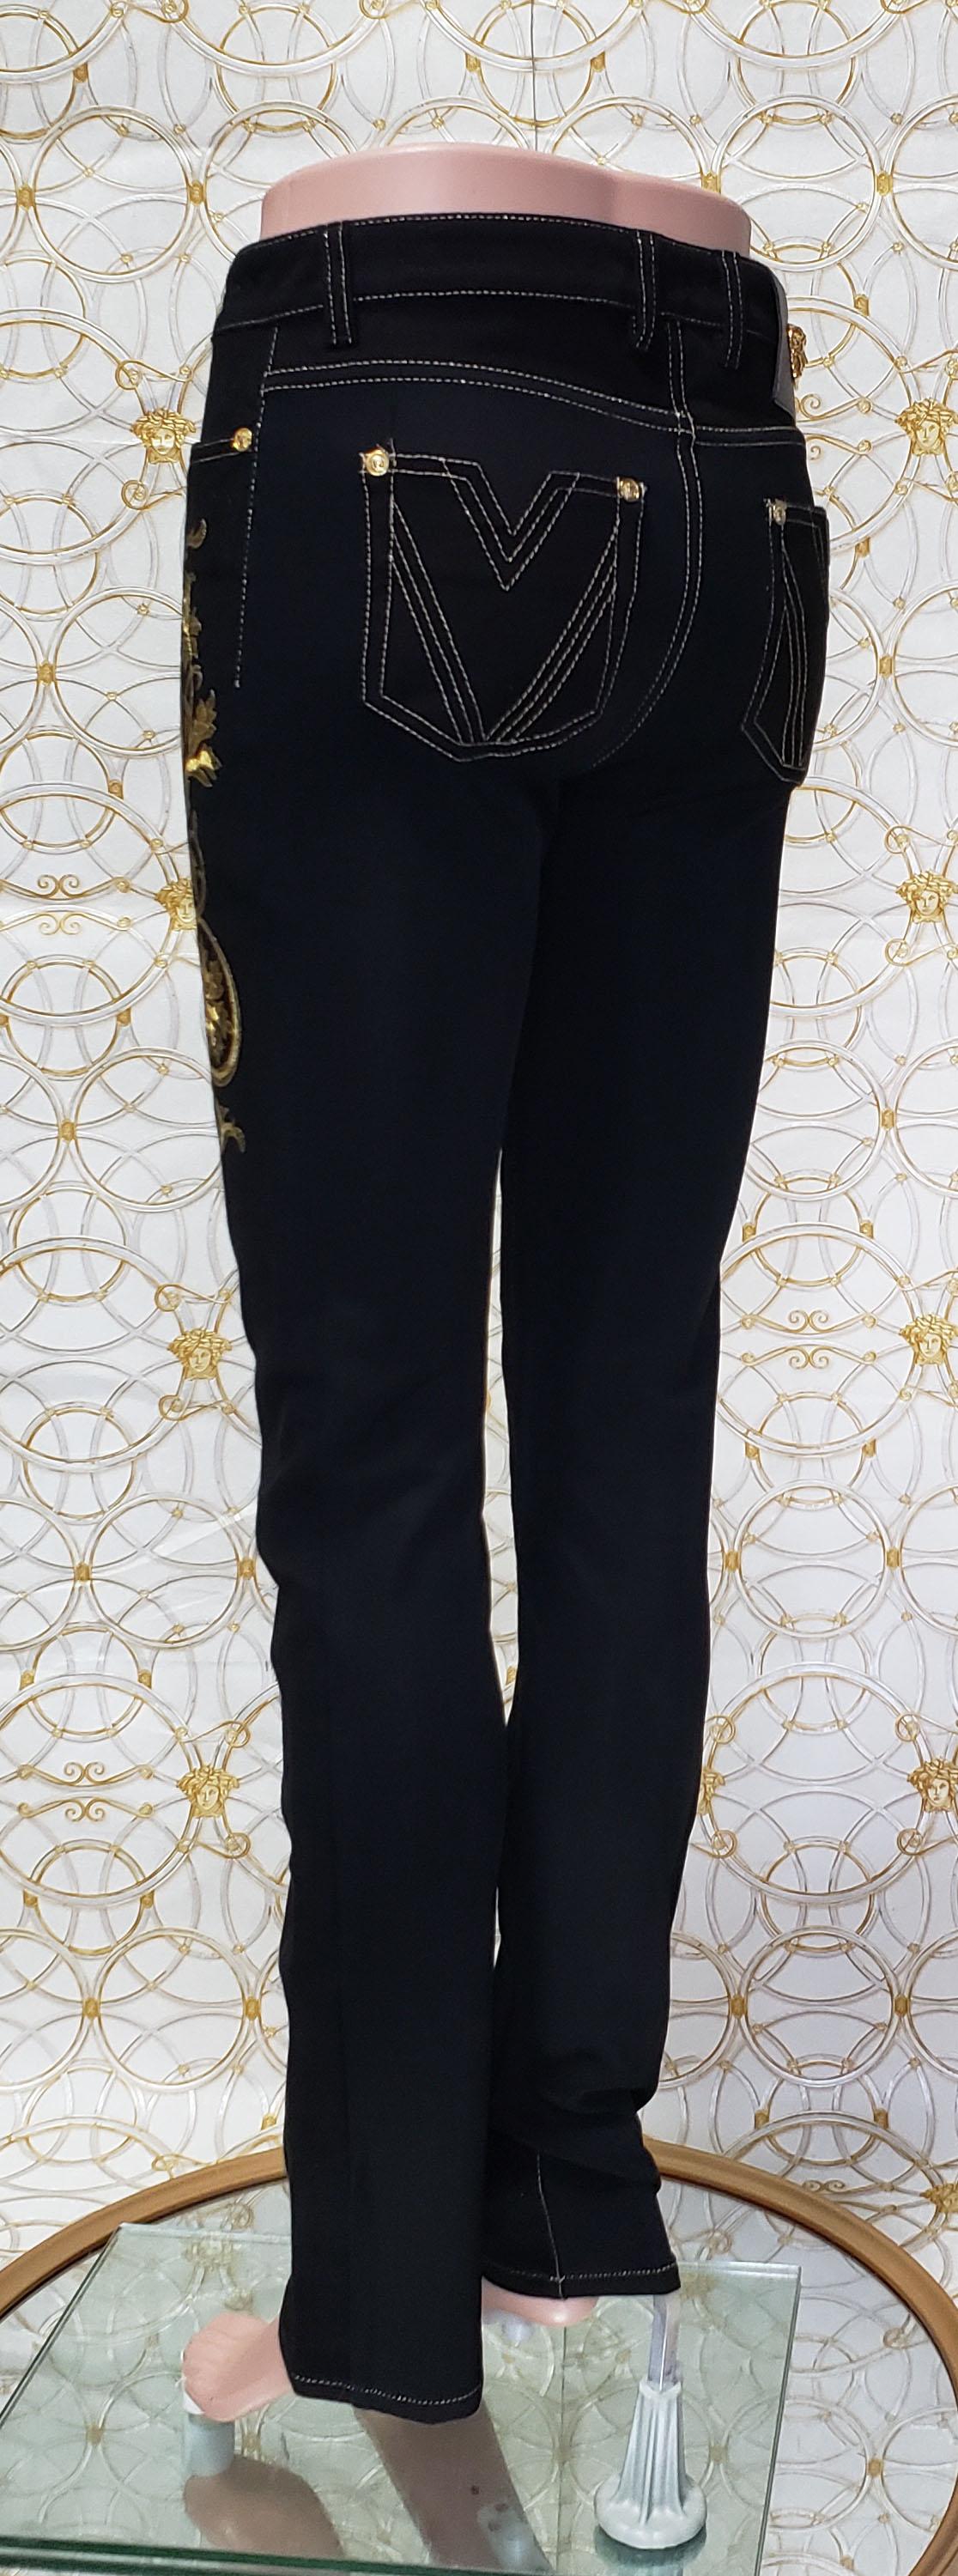 Pre-Fall 2013 L # 2 BRAND NEW VERSACE BAROQUE GOLD EMBROIDERED JEANS size 26 For Sale 2